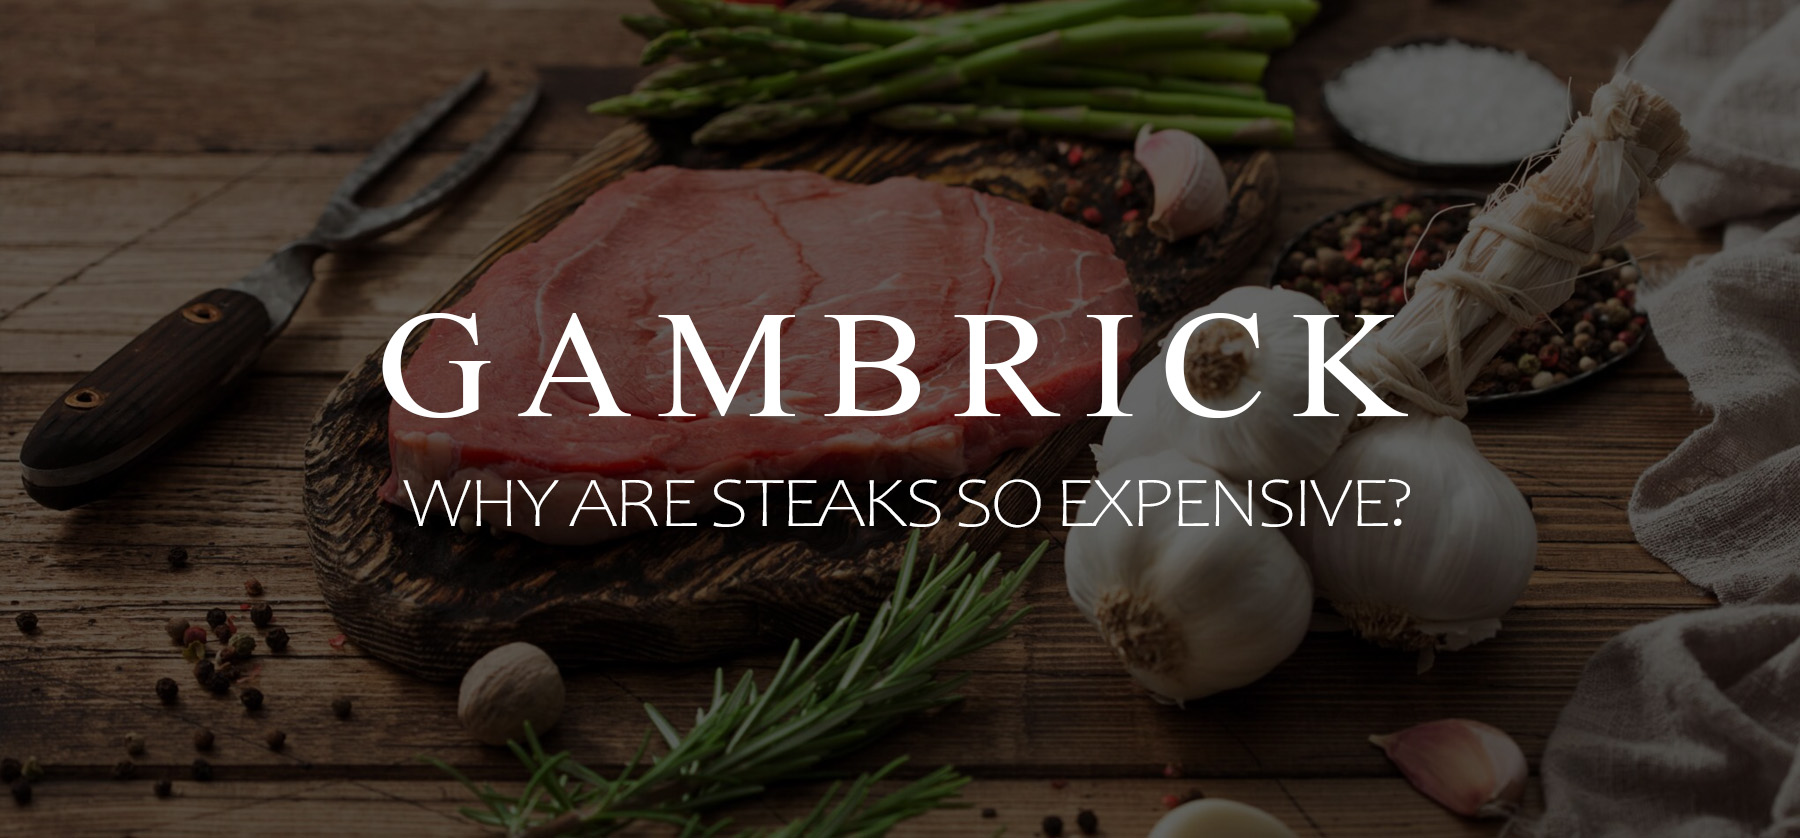 why are steaks so expensive banner